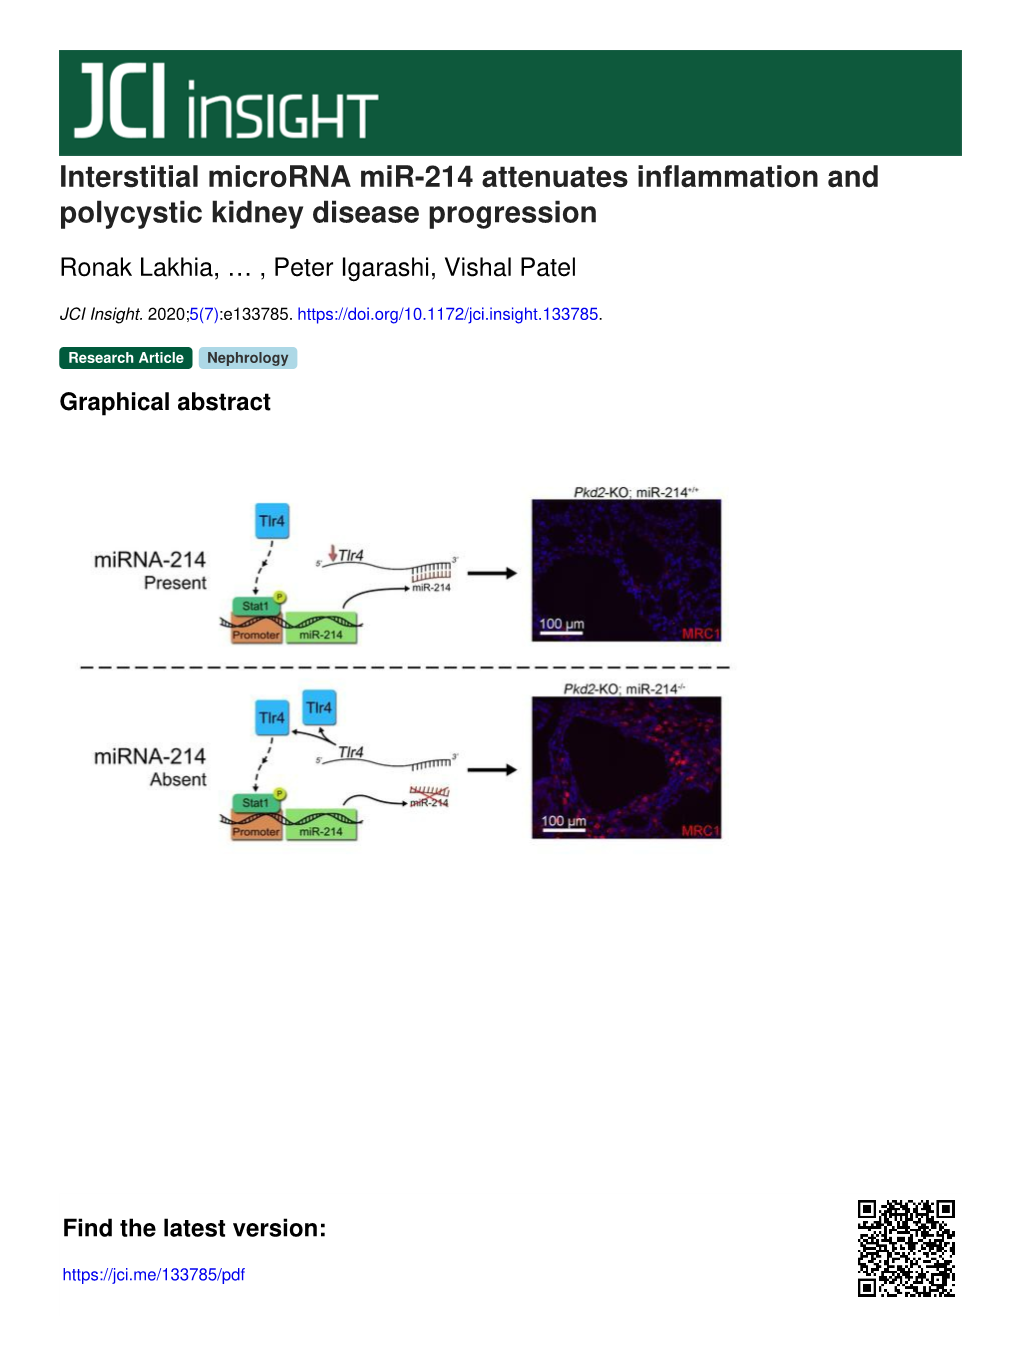 Interstitial Microrna Mir-214 Attenuates Inflammation and Polycystic Kidney Disease Progression